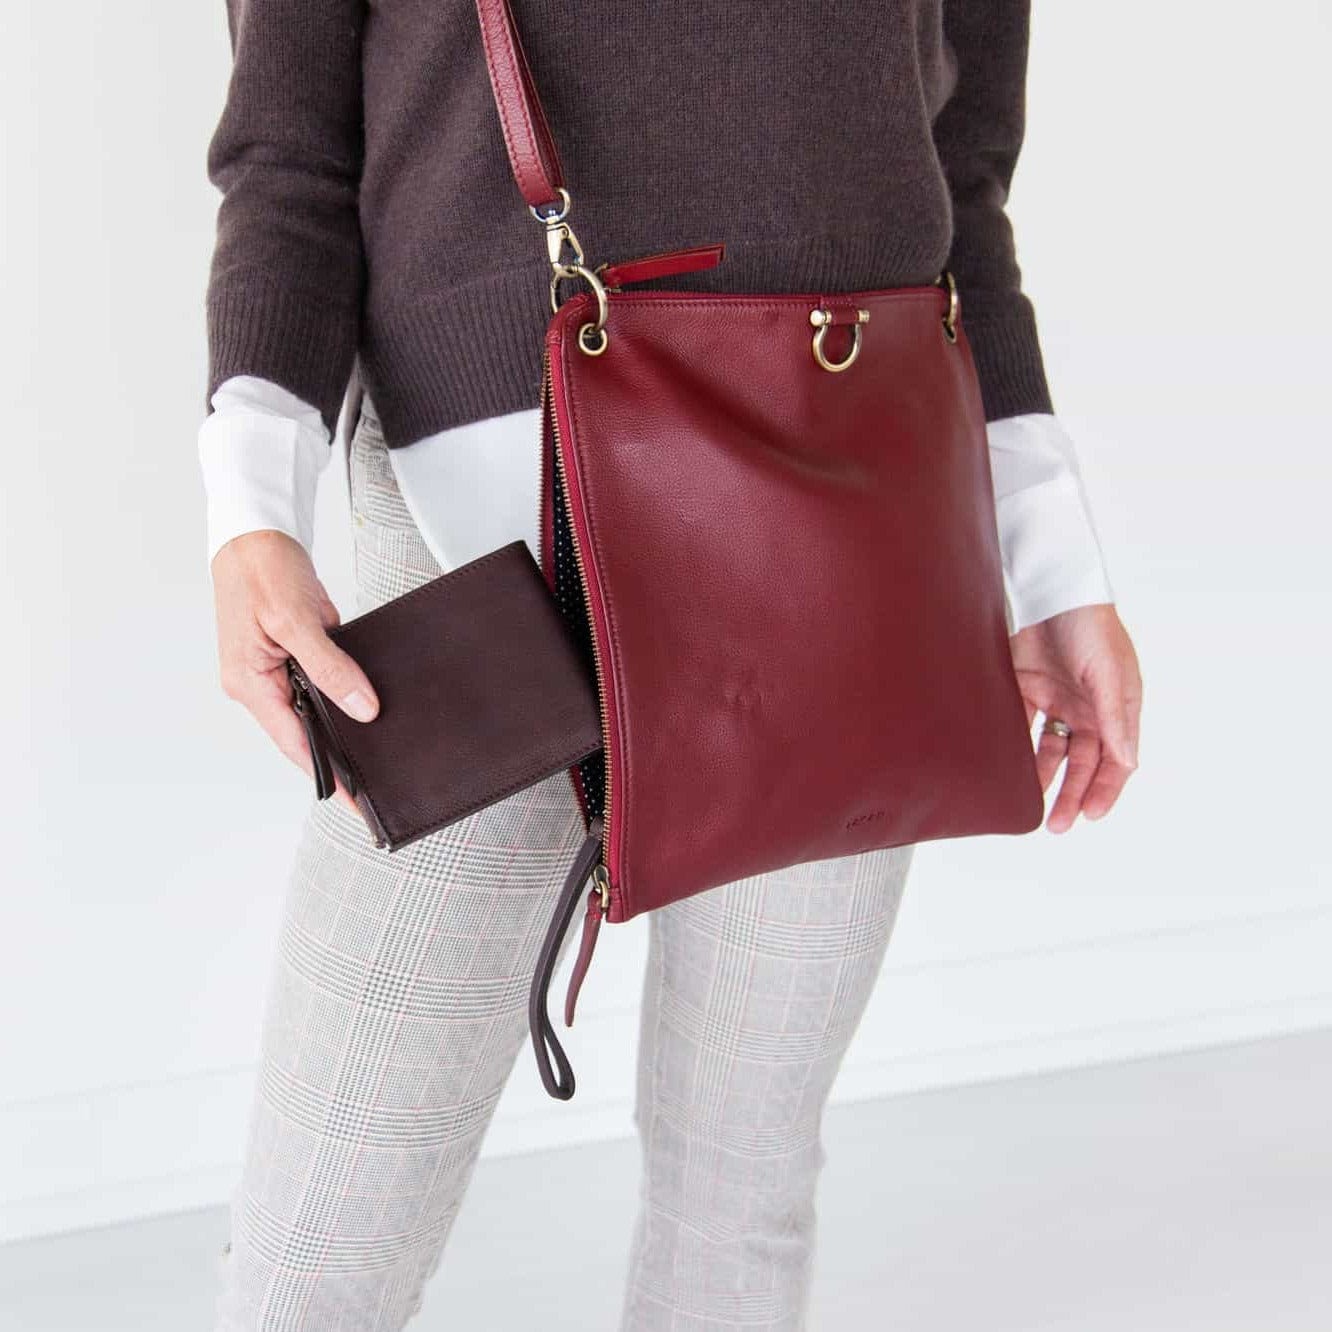 The Noelle billfold wristlet wallet in chocolate brown raw leather fits perfectly in small and medium-sized bags.